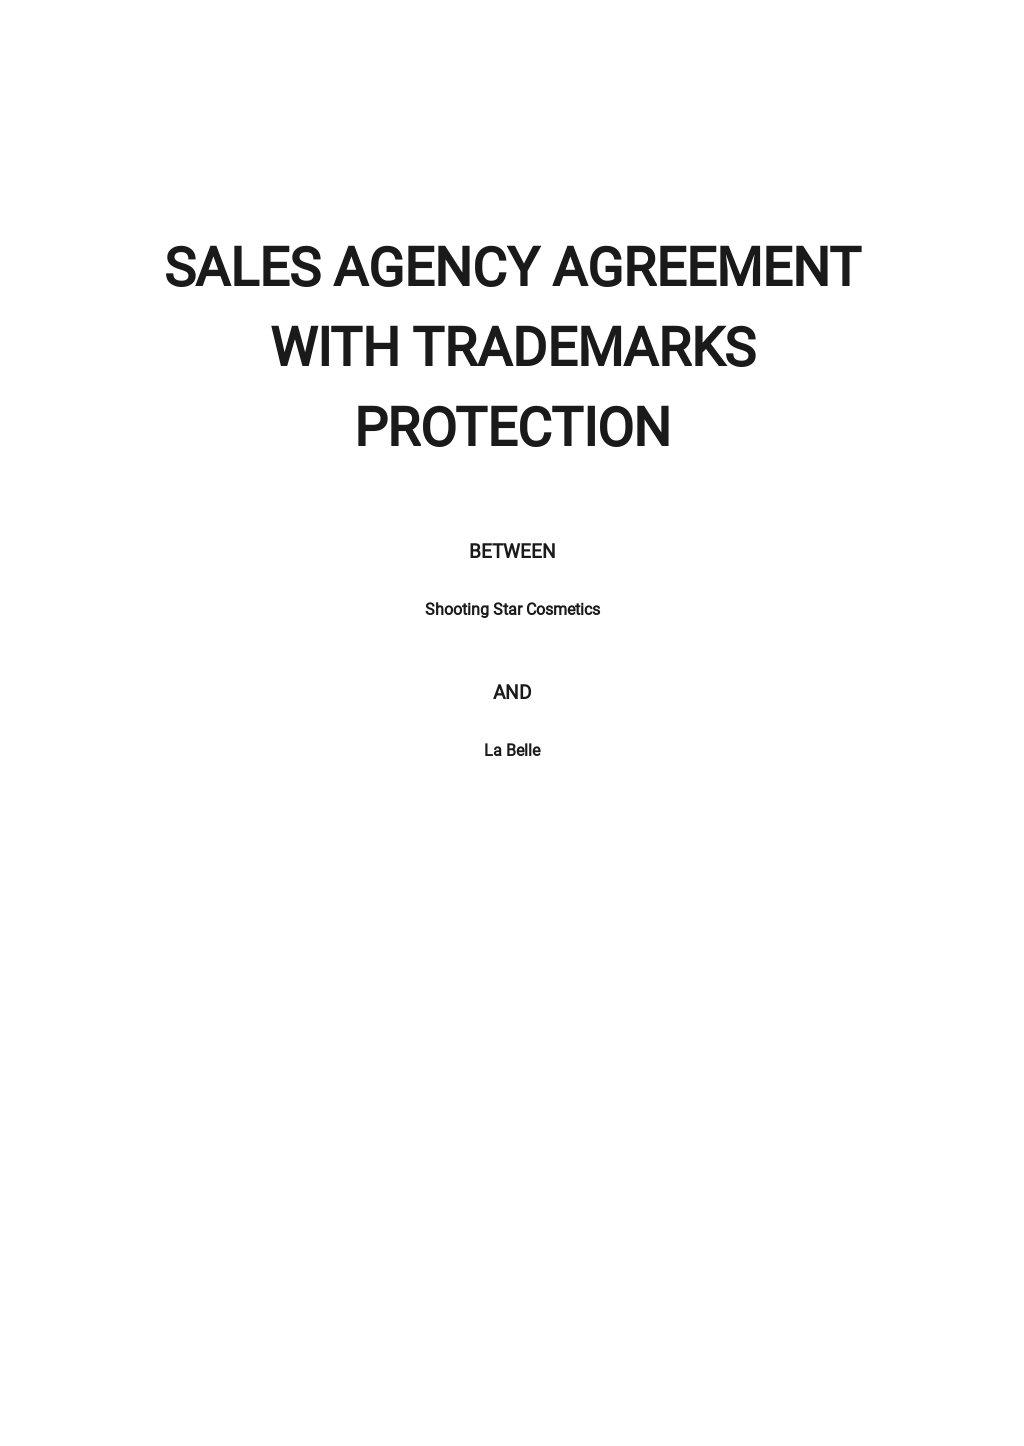 Sales Agency Agreement With Trademarks Protection Template.jpe